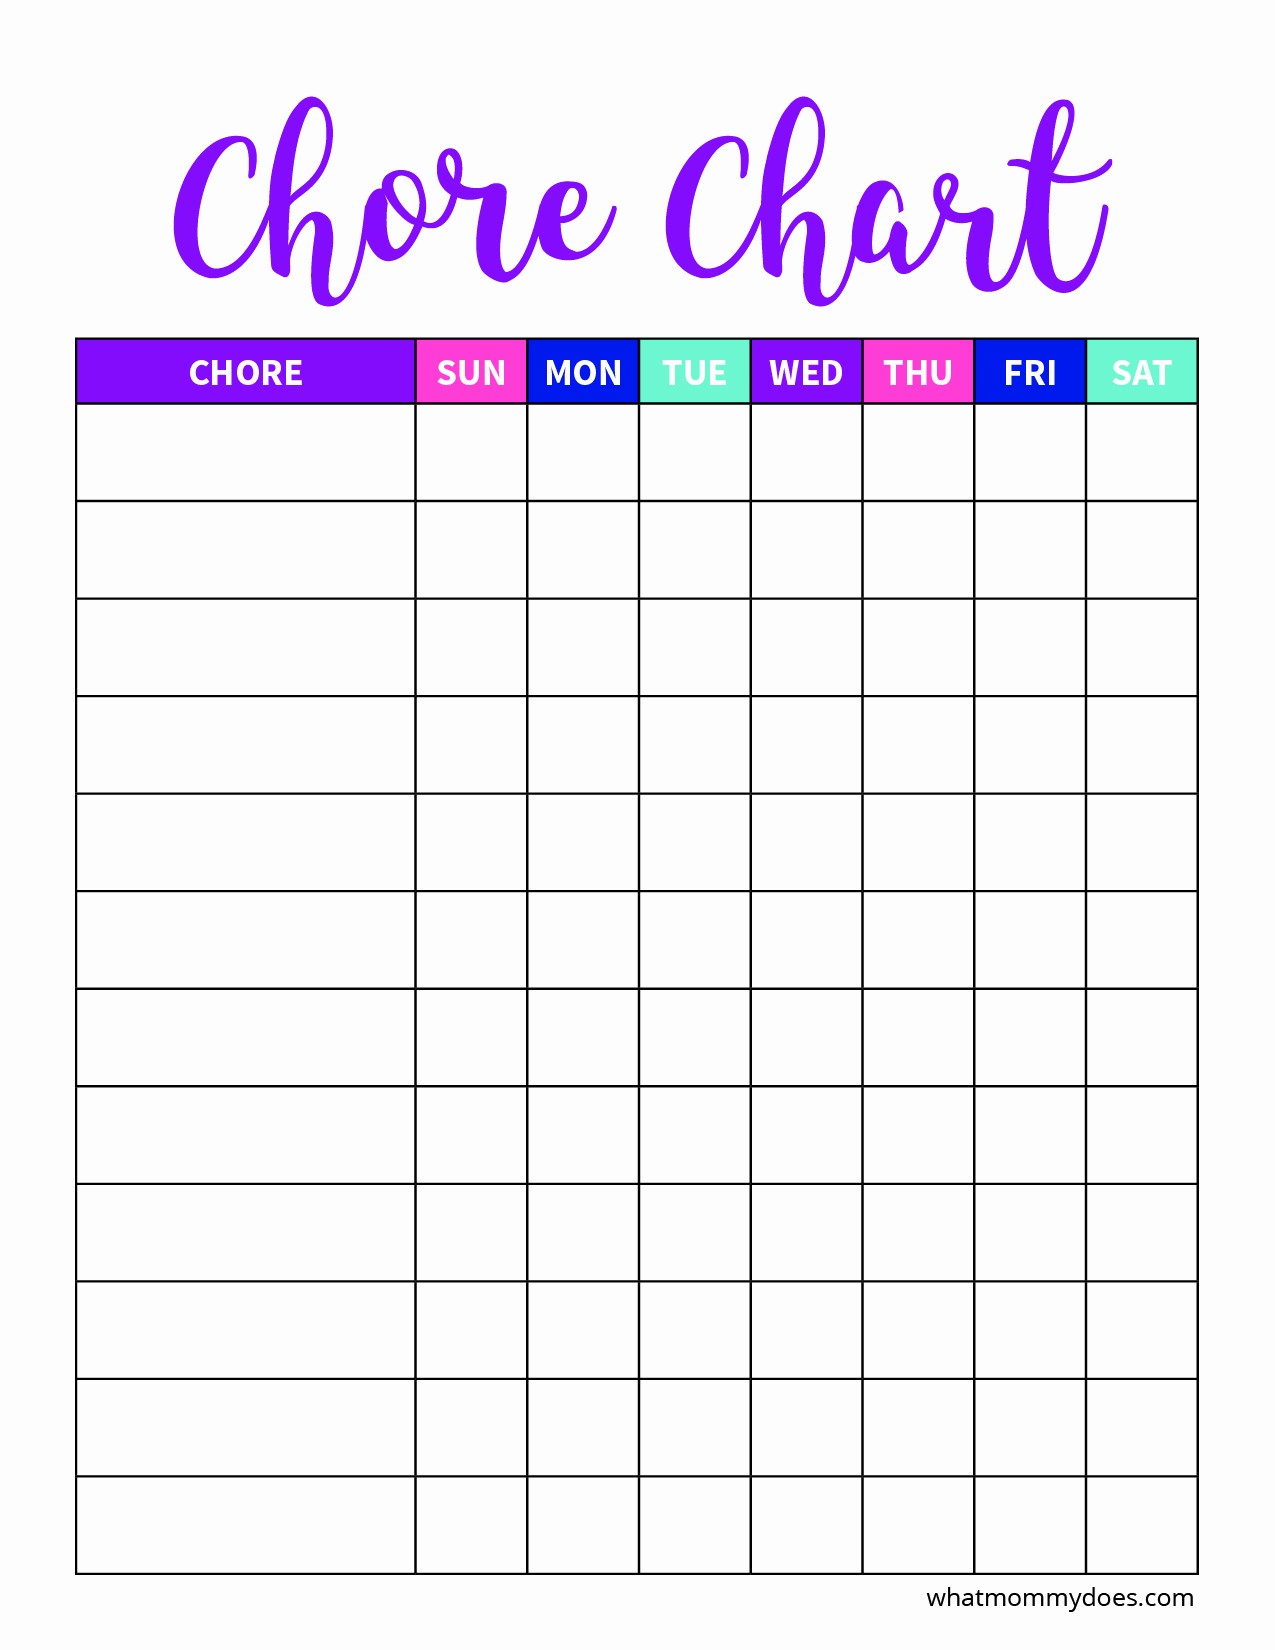 Weekly Chore Chart Template Excel Fresh Free Blank Printable Weekly Chore Chart Template for Kids